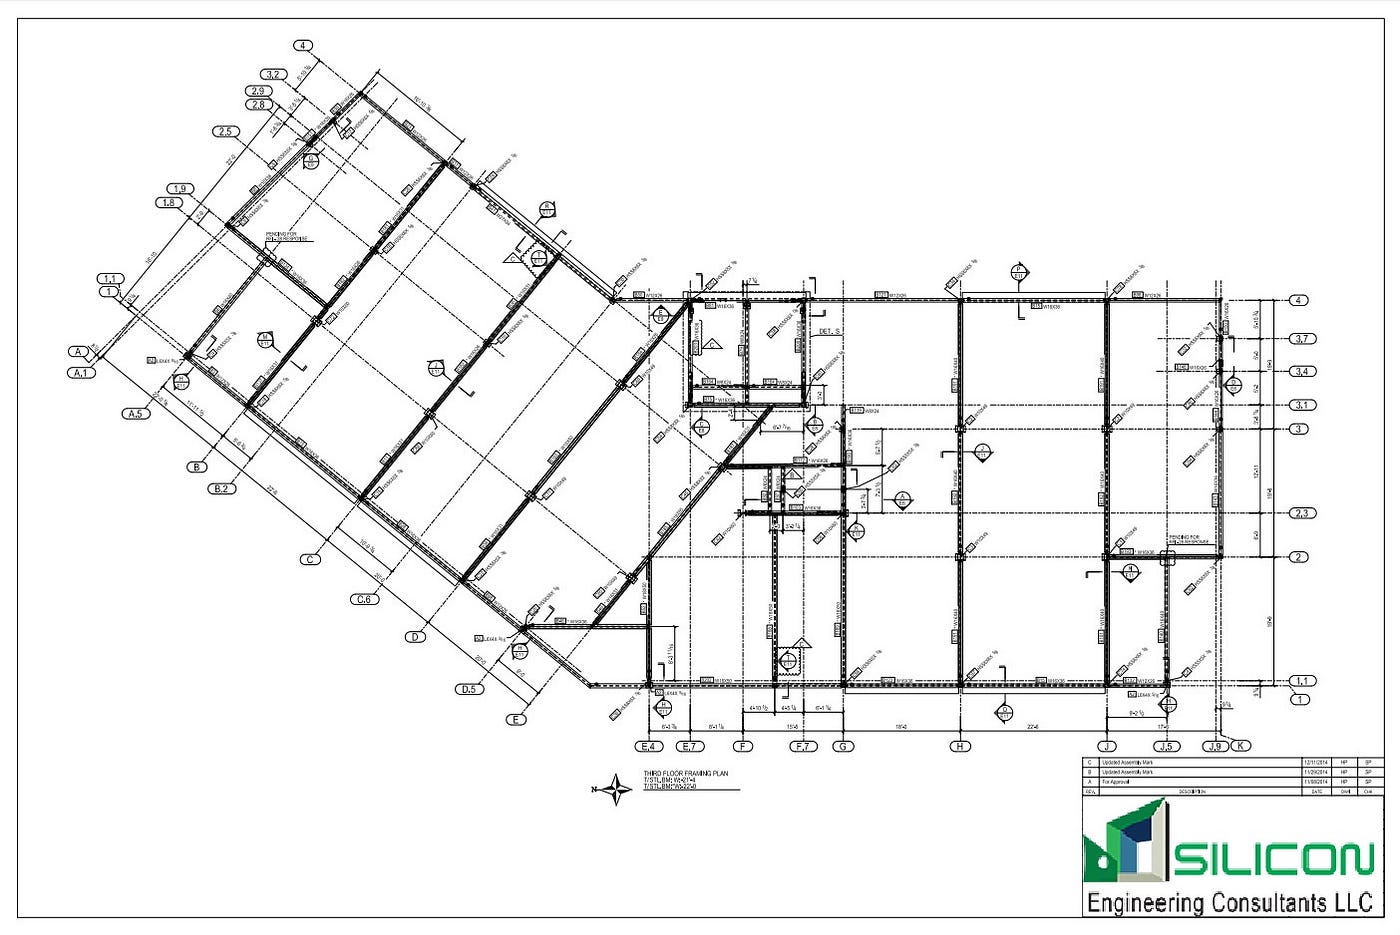 Steel Shop Drawings Services, Fabrication Drawings - Advenser